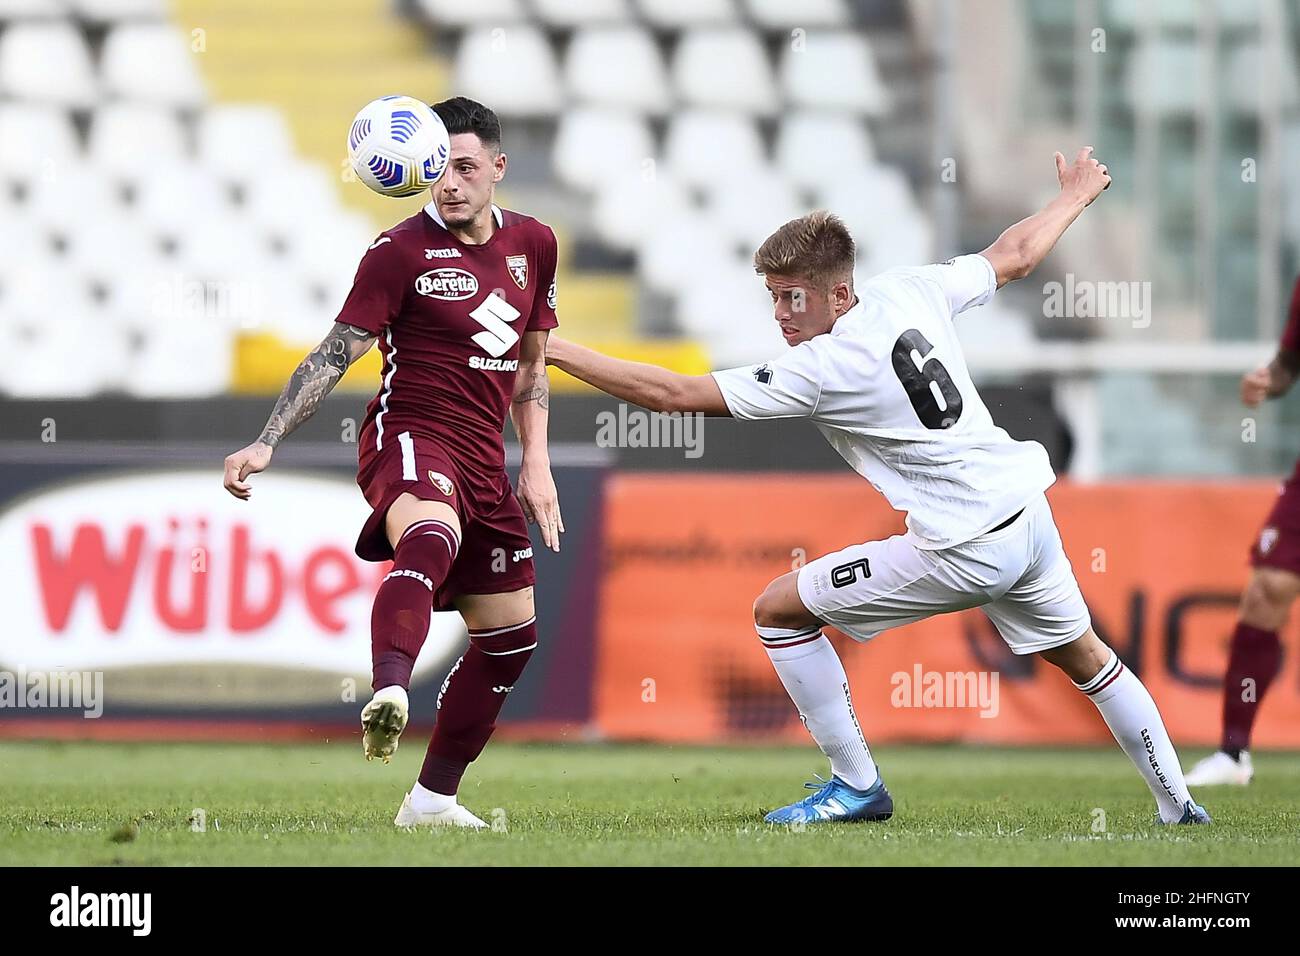 Davide De Marino of Pro Vercelli in action during the Lega Pro match  between Renate and Pro Vercelli at Stadio Citt di Meda in Meda, Italy, on  October 7 2020 (Photo by